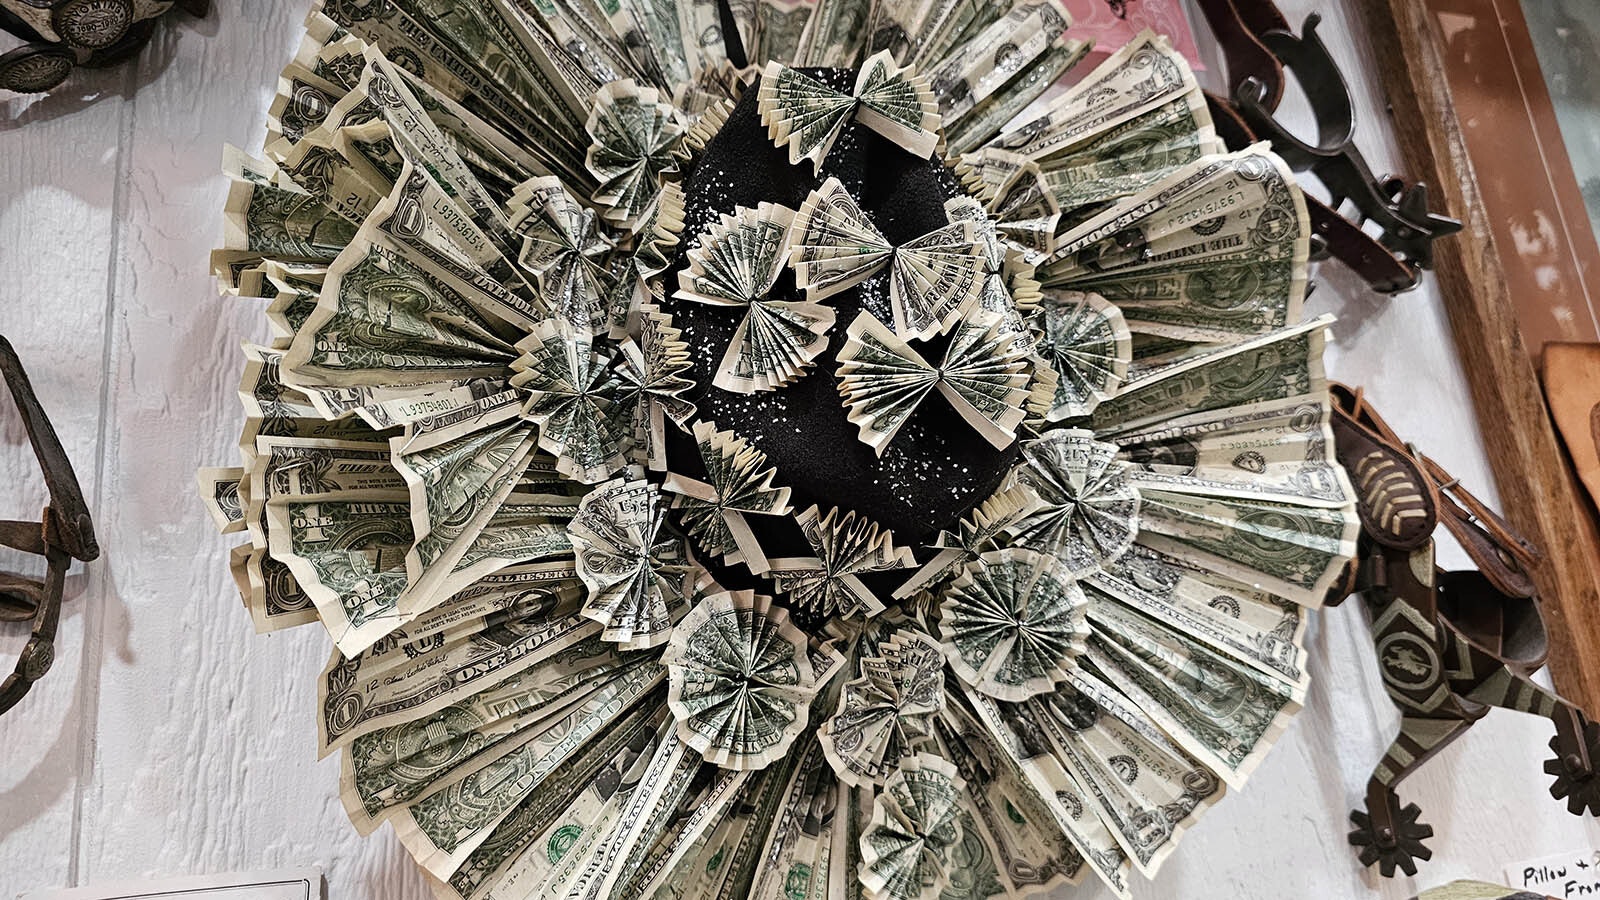 This hat is made of more than 100 $1 bills. Happy birthday!